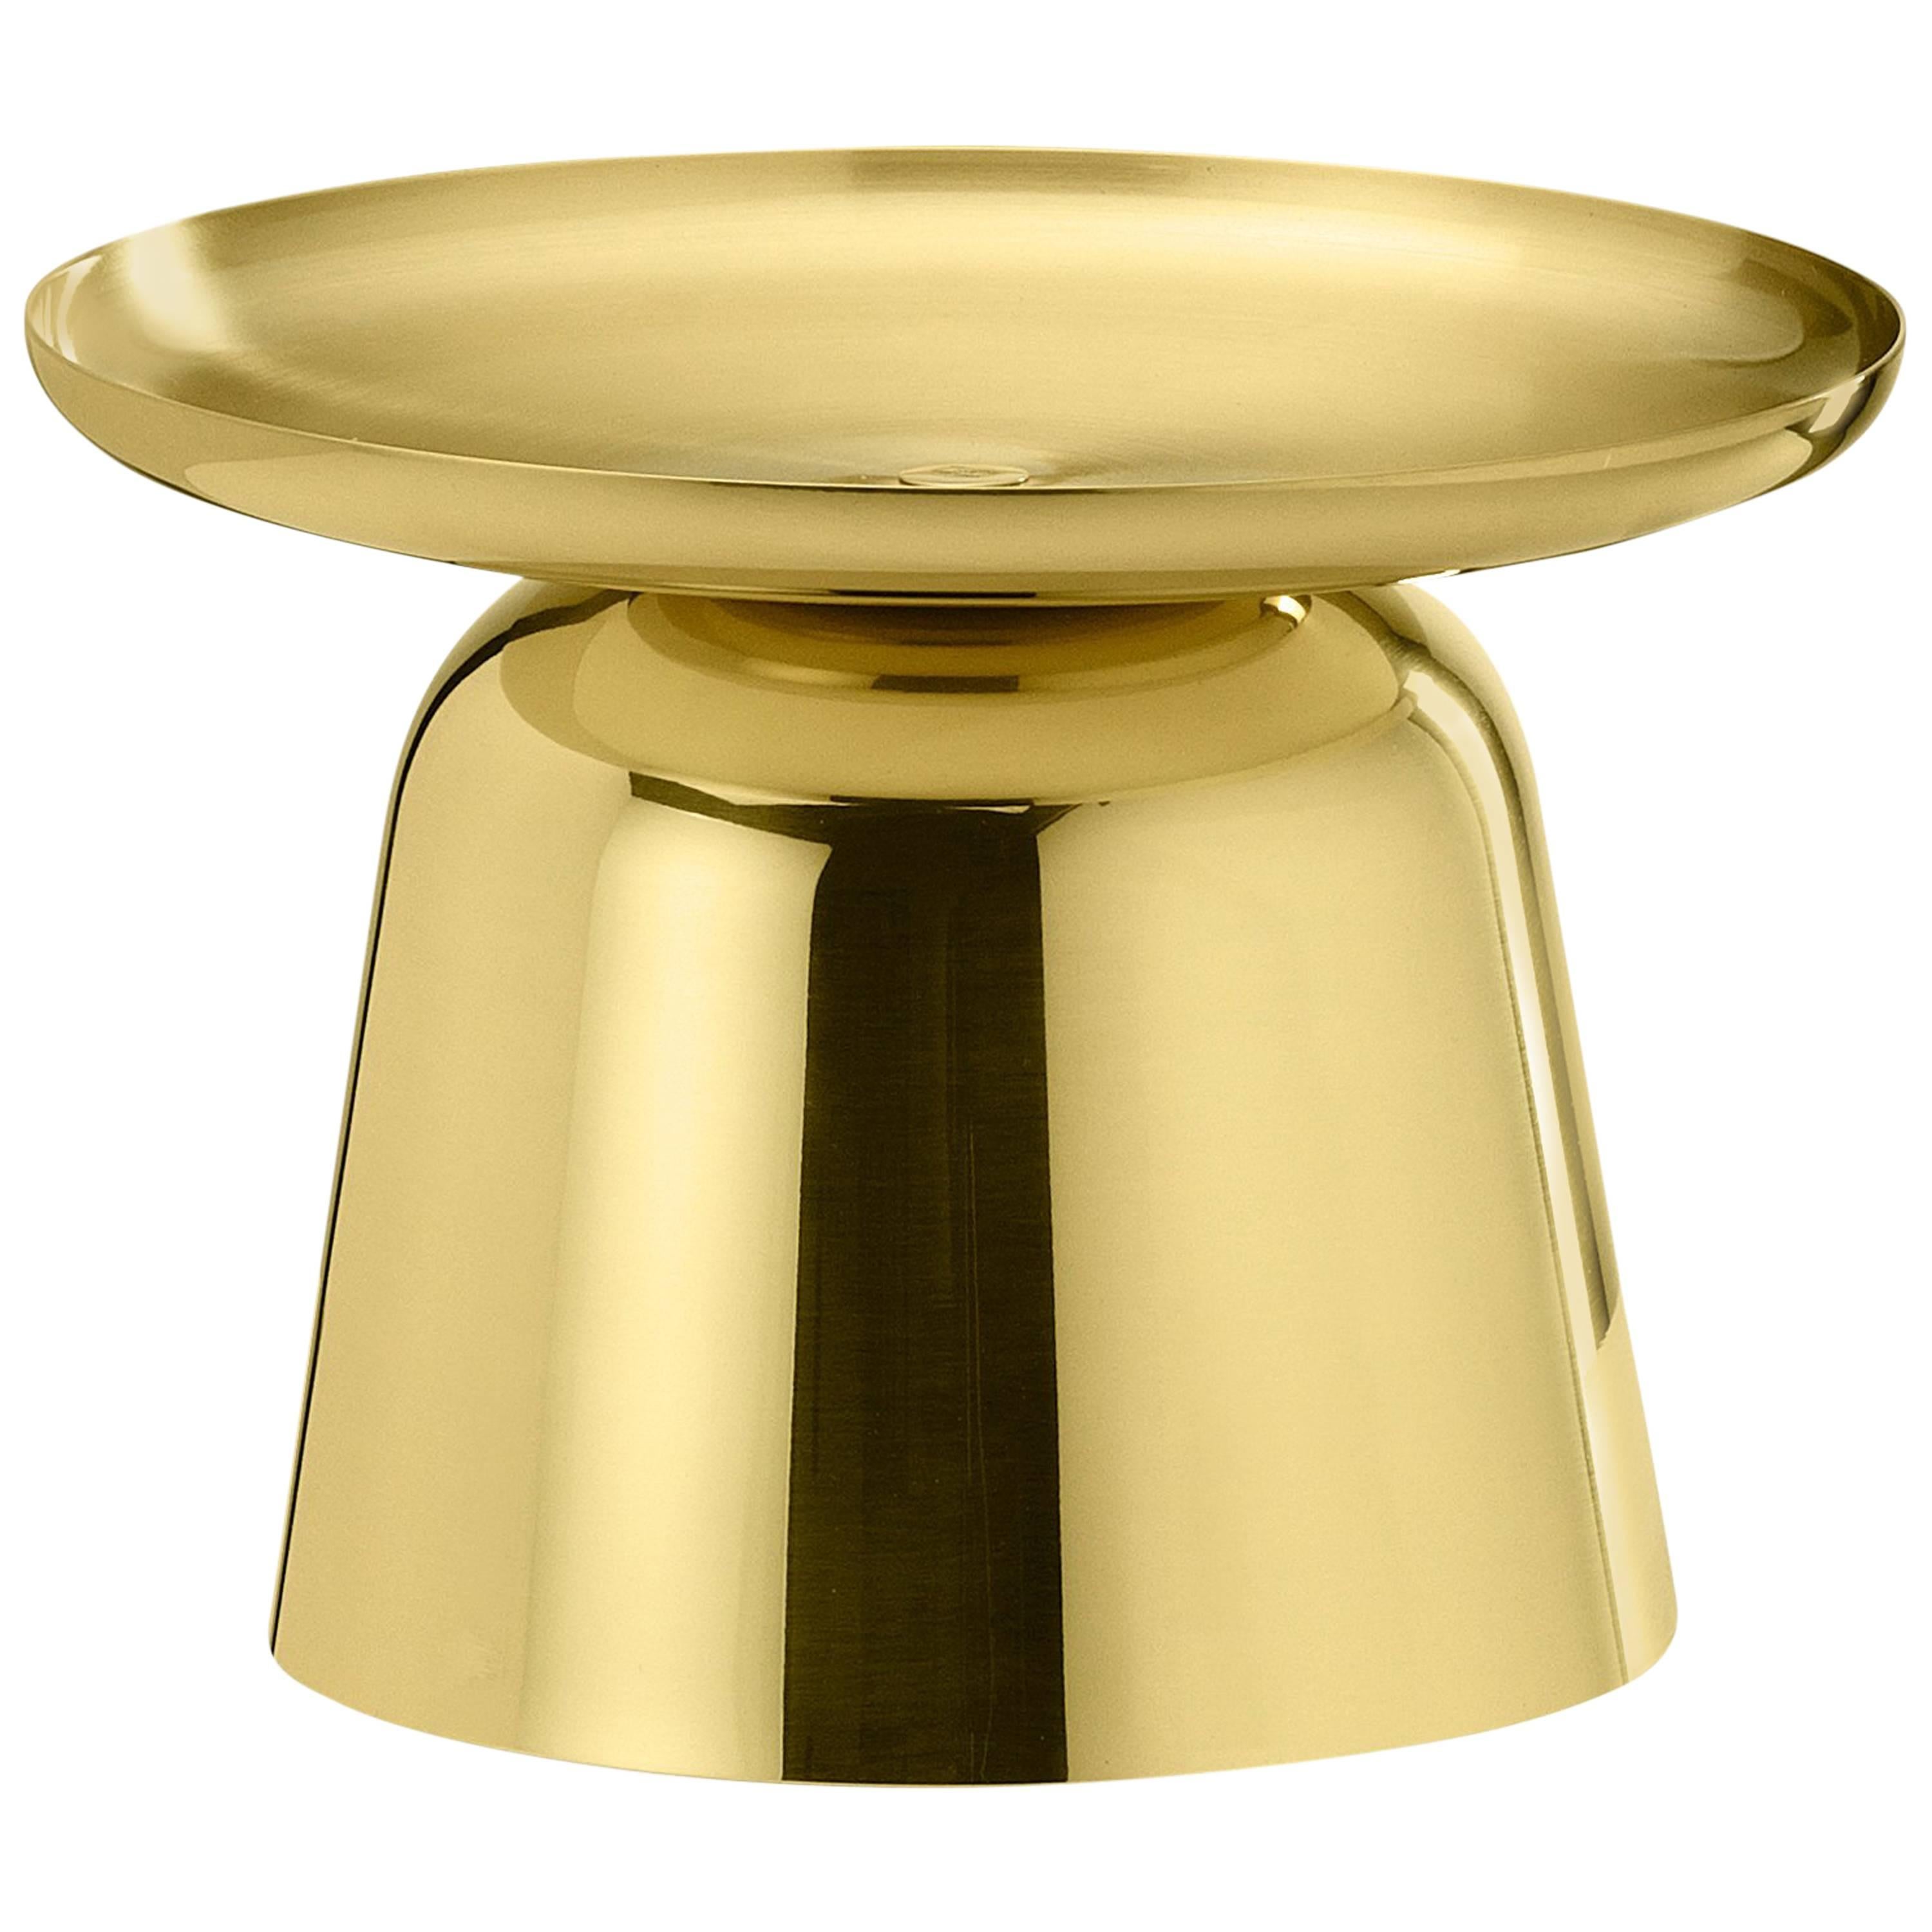 Ghidini 1961 Gil & Luc Small Vase in Polished Brass For Sale